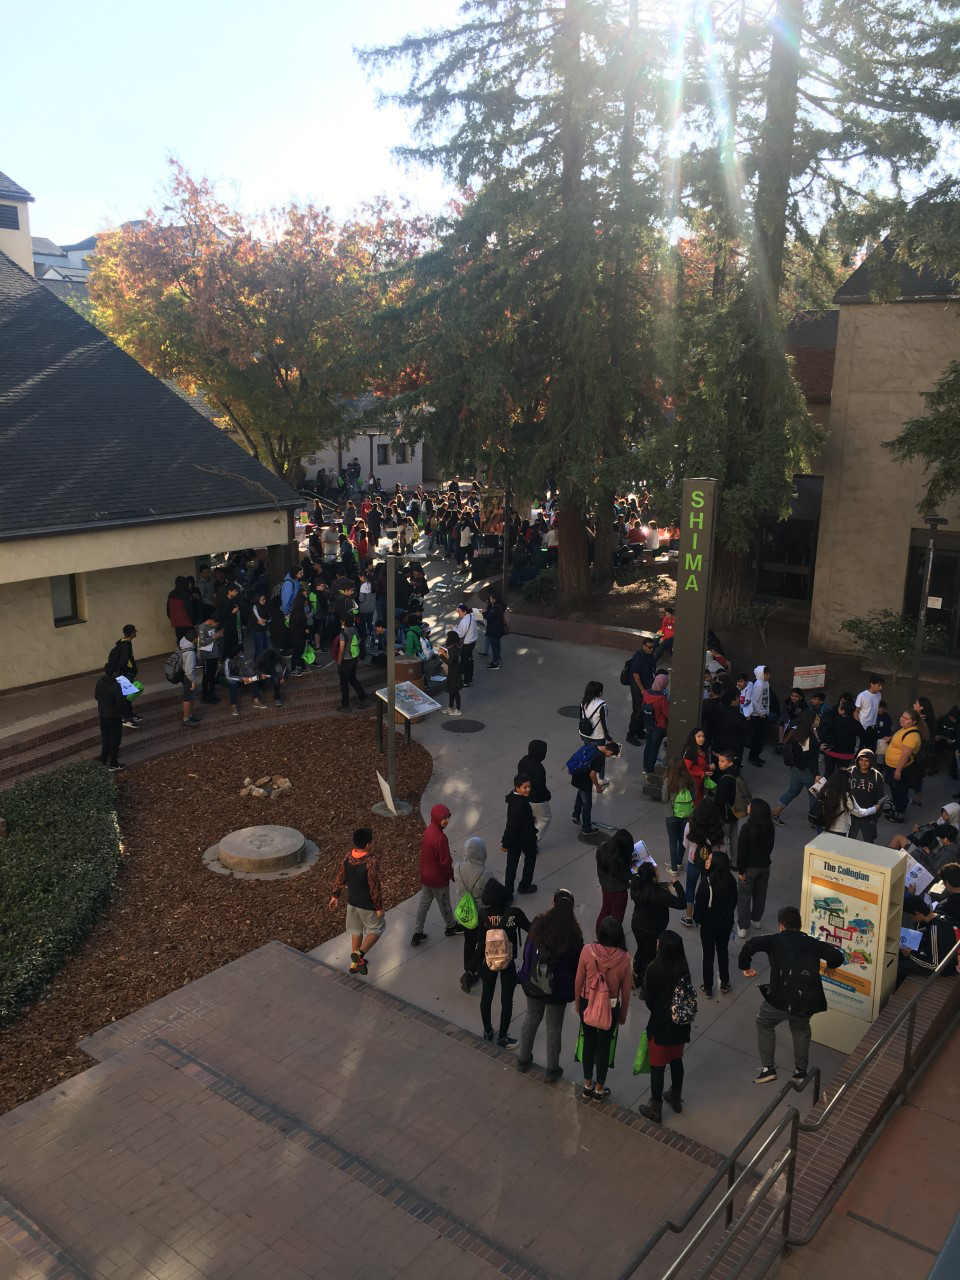 Crowds of students on the Delta campus